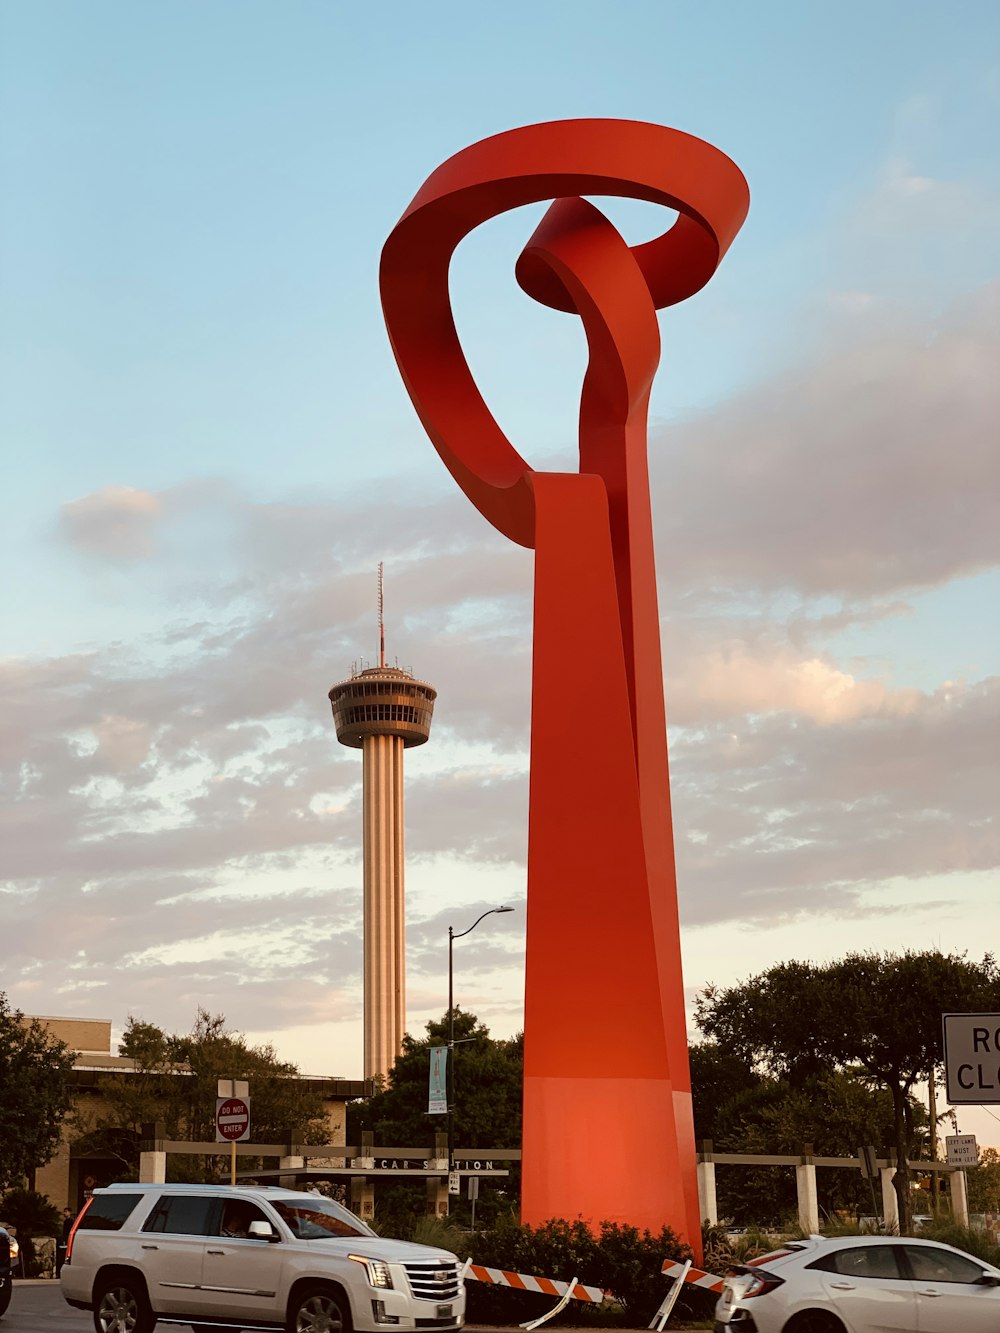 a large red sculpture in the middle of a parking lot